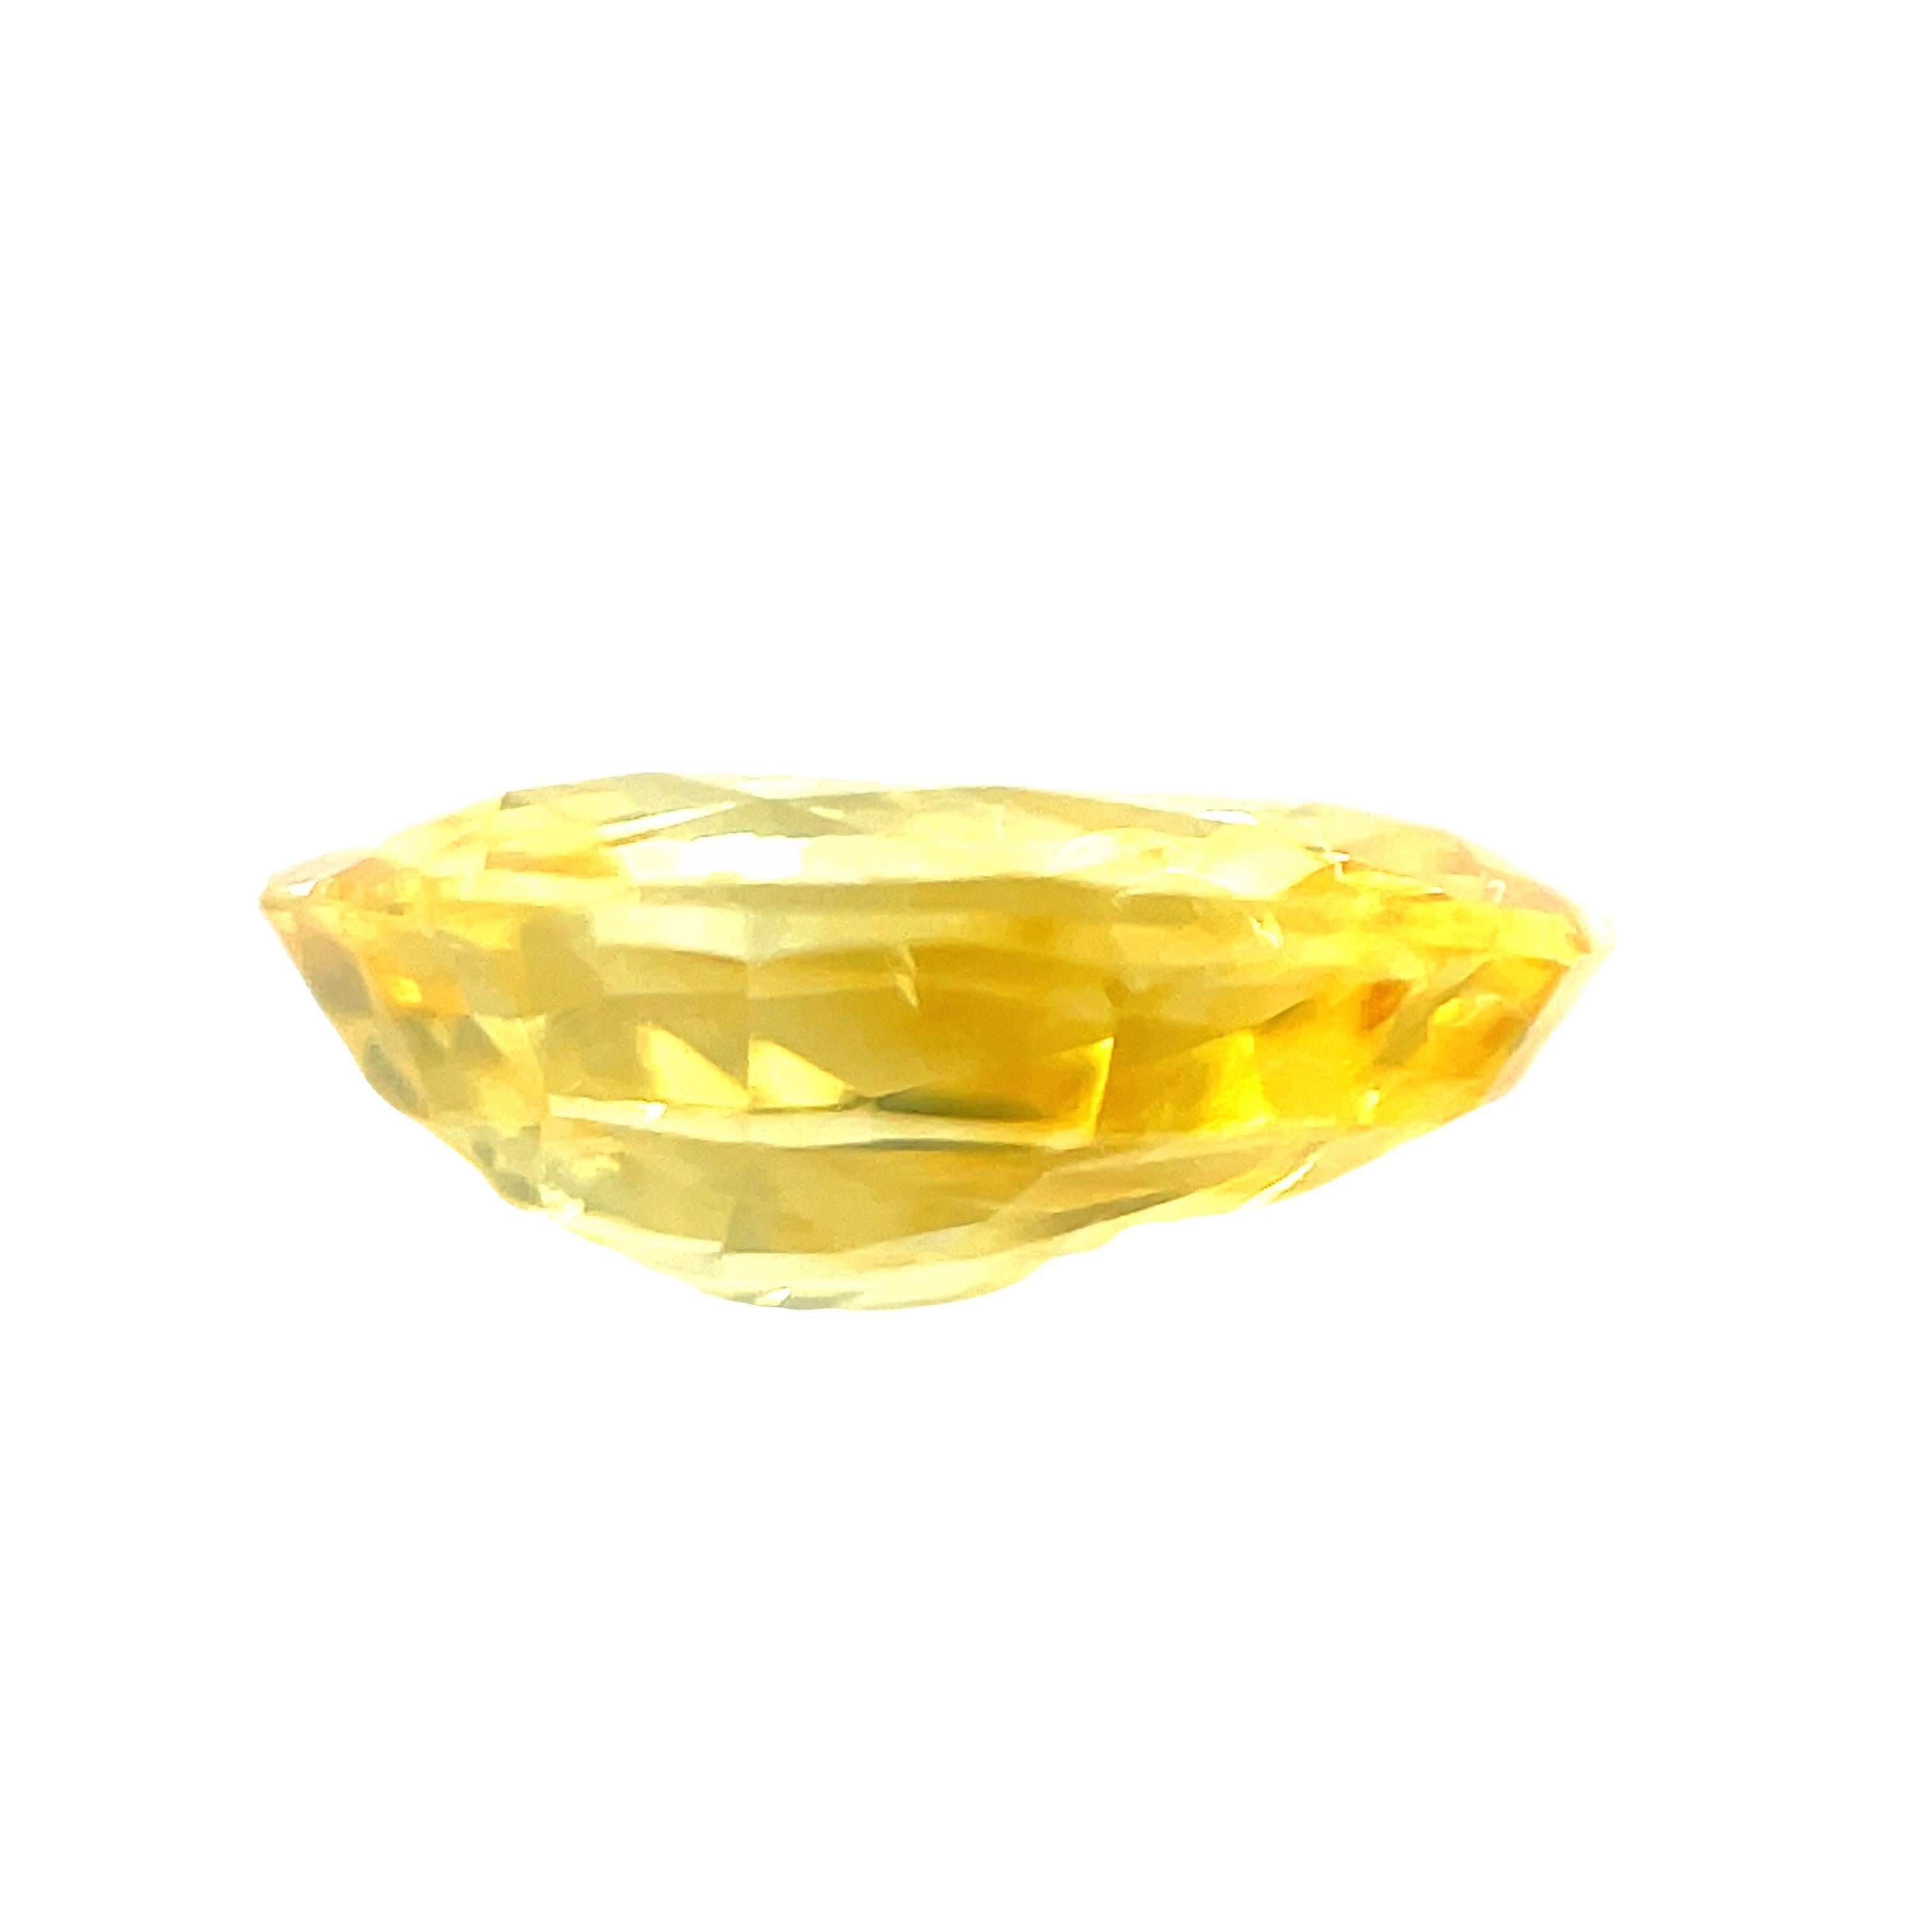 This bright lemon yellow sapphire with its sparkling golden highlights will make a gorgeous piece of jewelry! It weighs 3.22 carats and is a pleasing oval shape with the face-up appearance of a much larger stone! This gem would be perfect in a